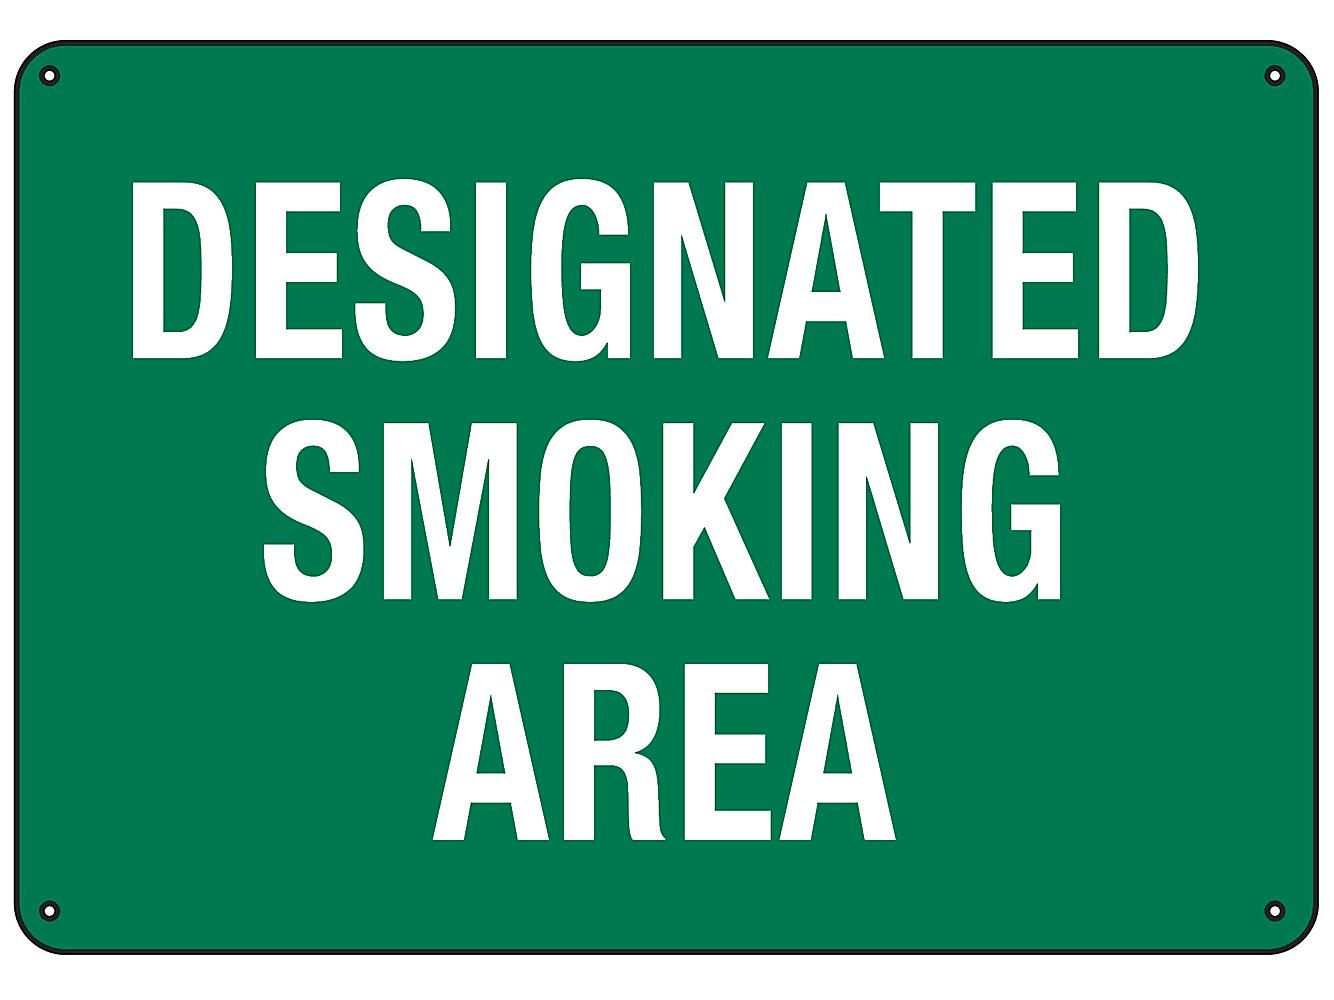 300x400mm Rigid Plastic Sign Smoking In Designated Areas Only 